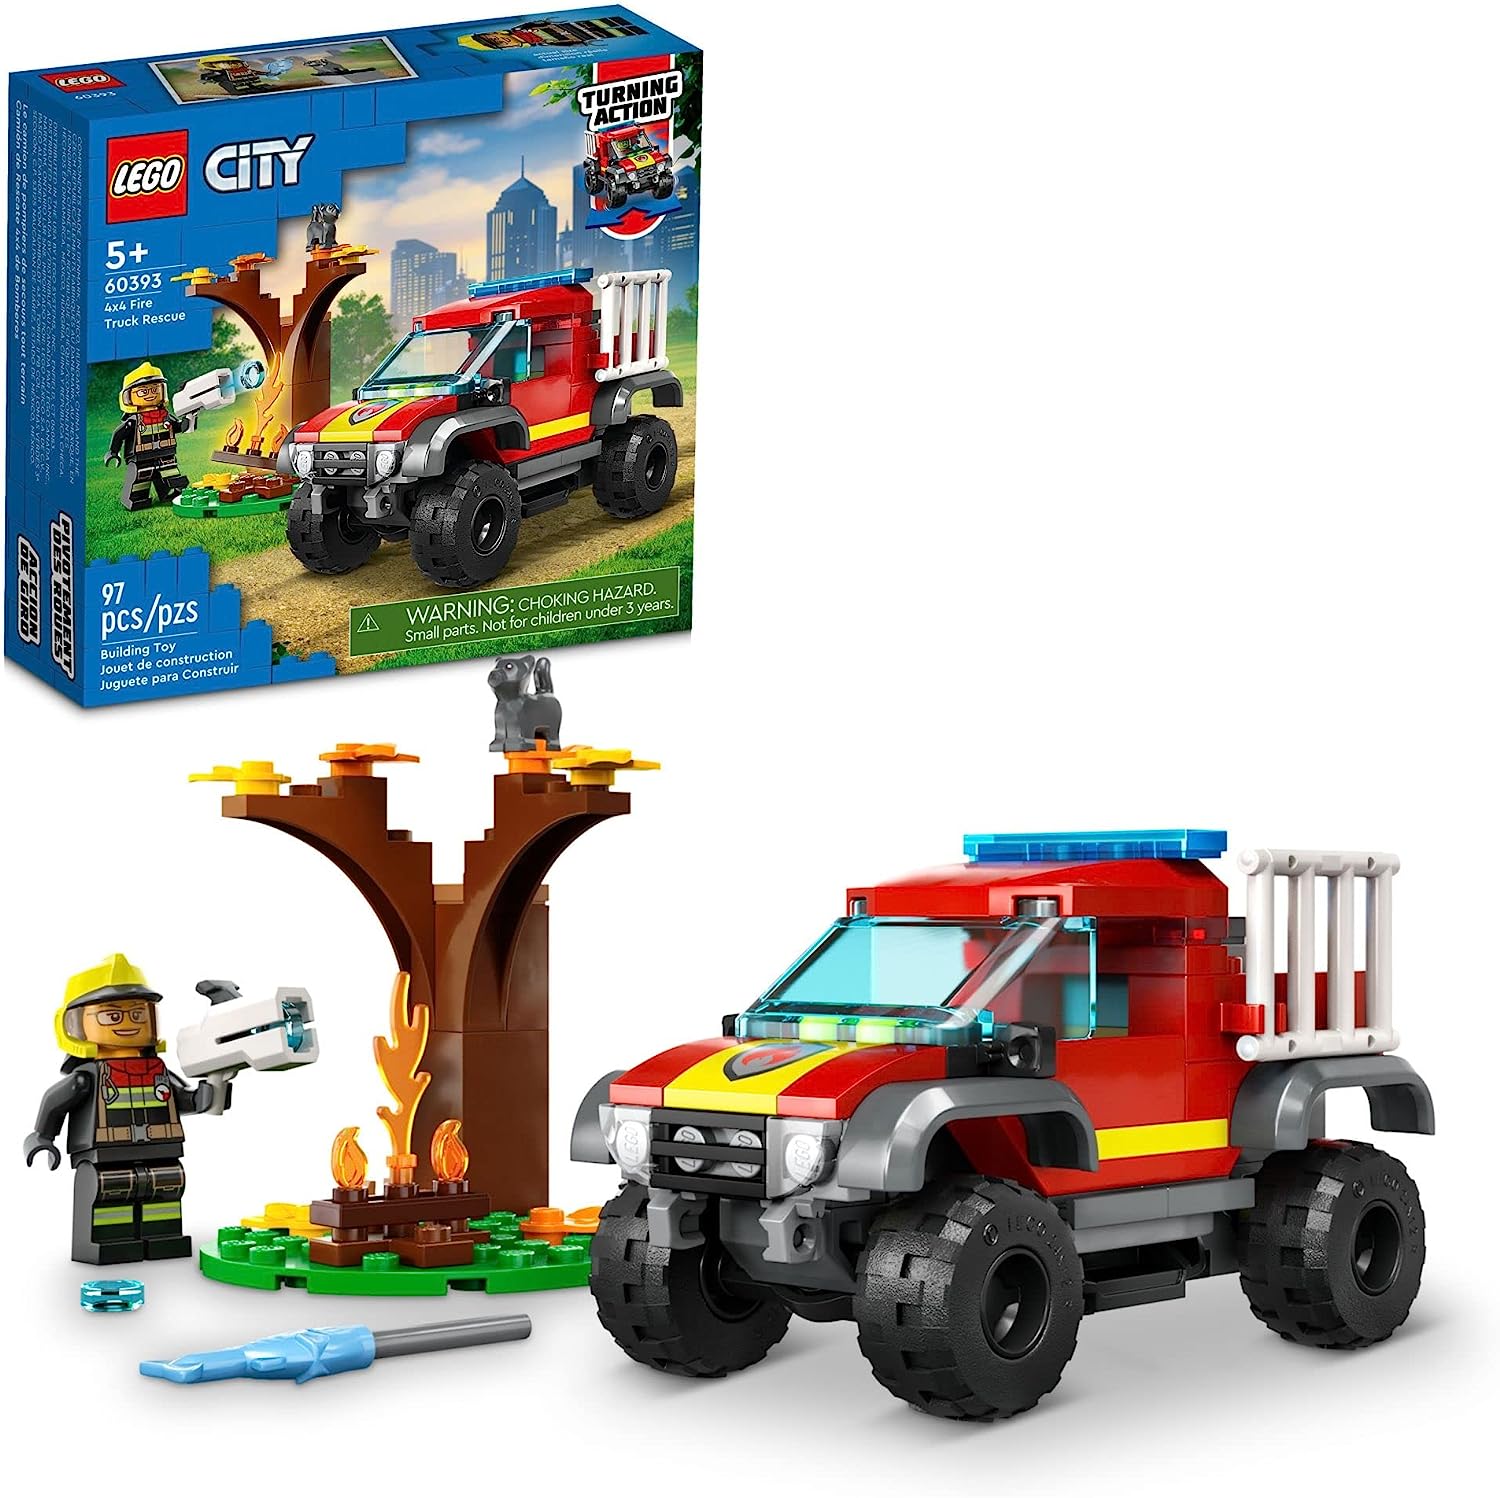 LEGO City Fire - 4x4 Fire Truck Rescue - Best for Ages 6 to 9